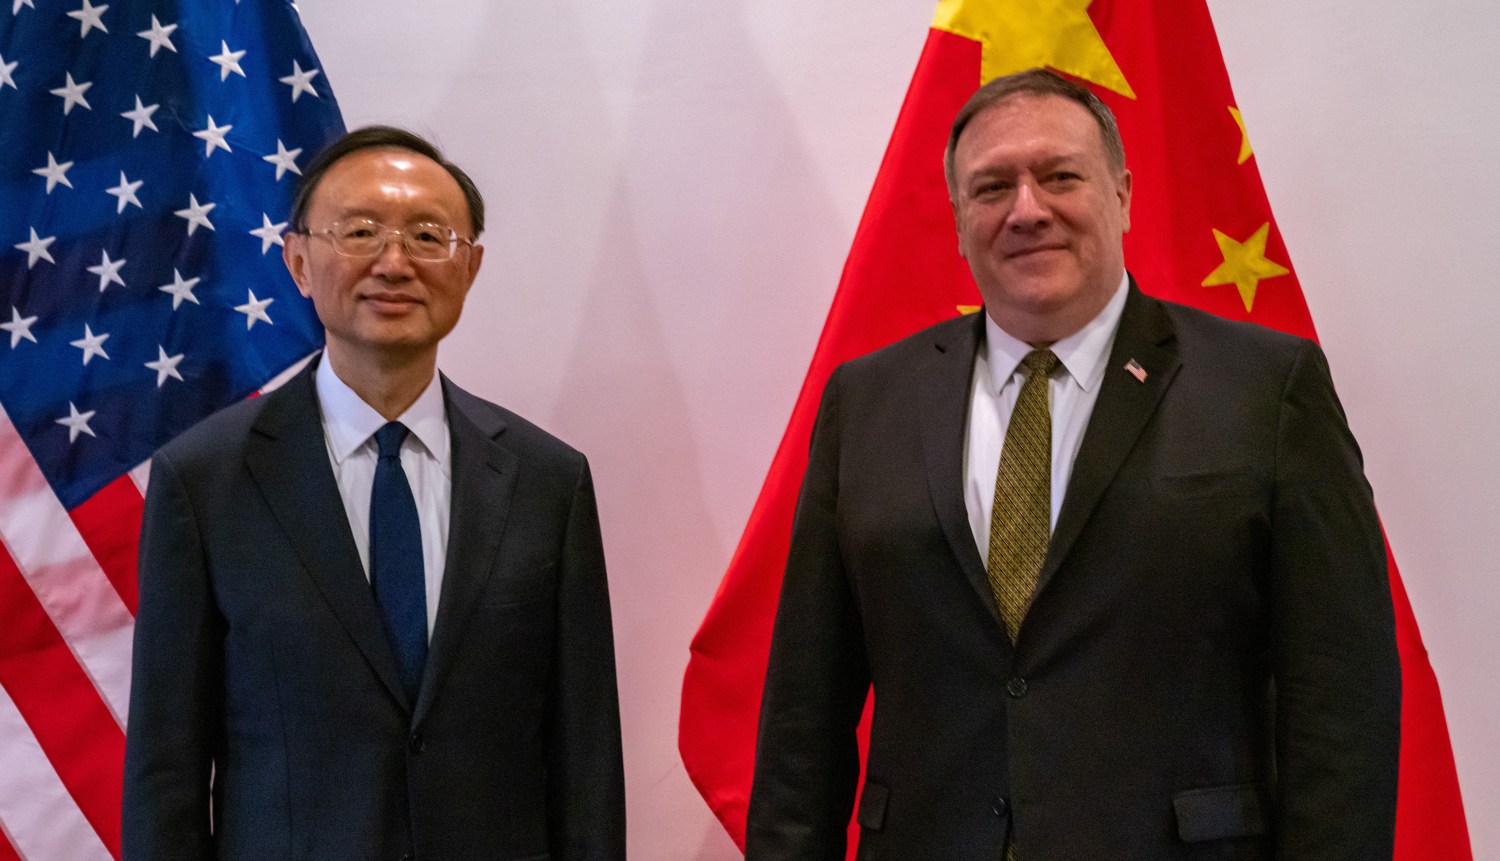 HAWAII, UNITED STATES - United States Secretary of State Mike Pompeo (right) met with senior Chinese diplomat Yang Jiechi (left), a member of the Political Bureau of the Central Committee of the Communist Party of China (CCP) and director of the Office of the Commission of Foreign Affairs of the CPC Central Committee, in Hawaii, United States on June 17, 2020. The meeting between Pompeo and Yang comes at a time of increasing tension between the United States and China. The United States has hardened its speech on China since the coronavirus pandemic began, and both President Donald Trump and Pompeo have launched repeated attacks on China in this regard, accusing the Asian country of little transparency in communicating the threat. of COVID-19.